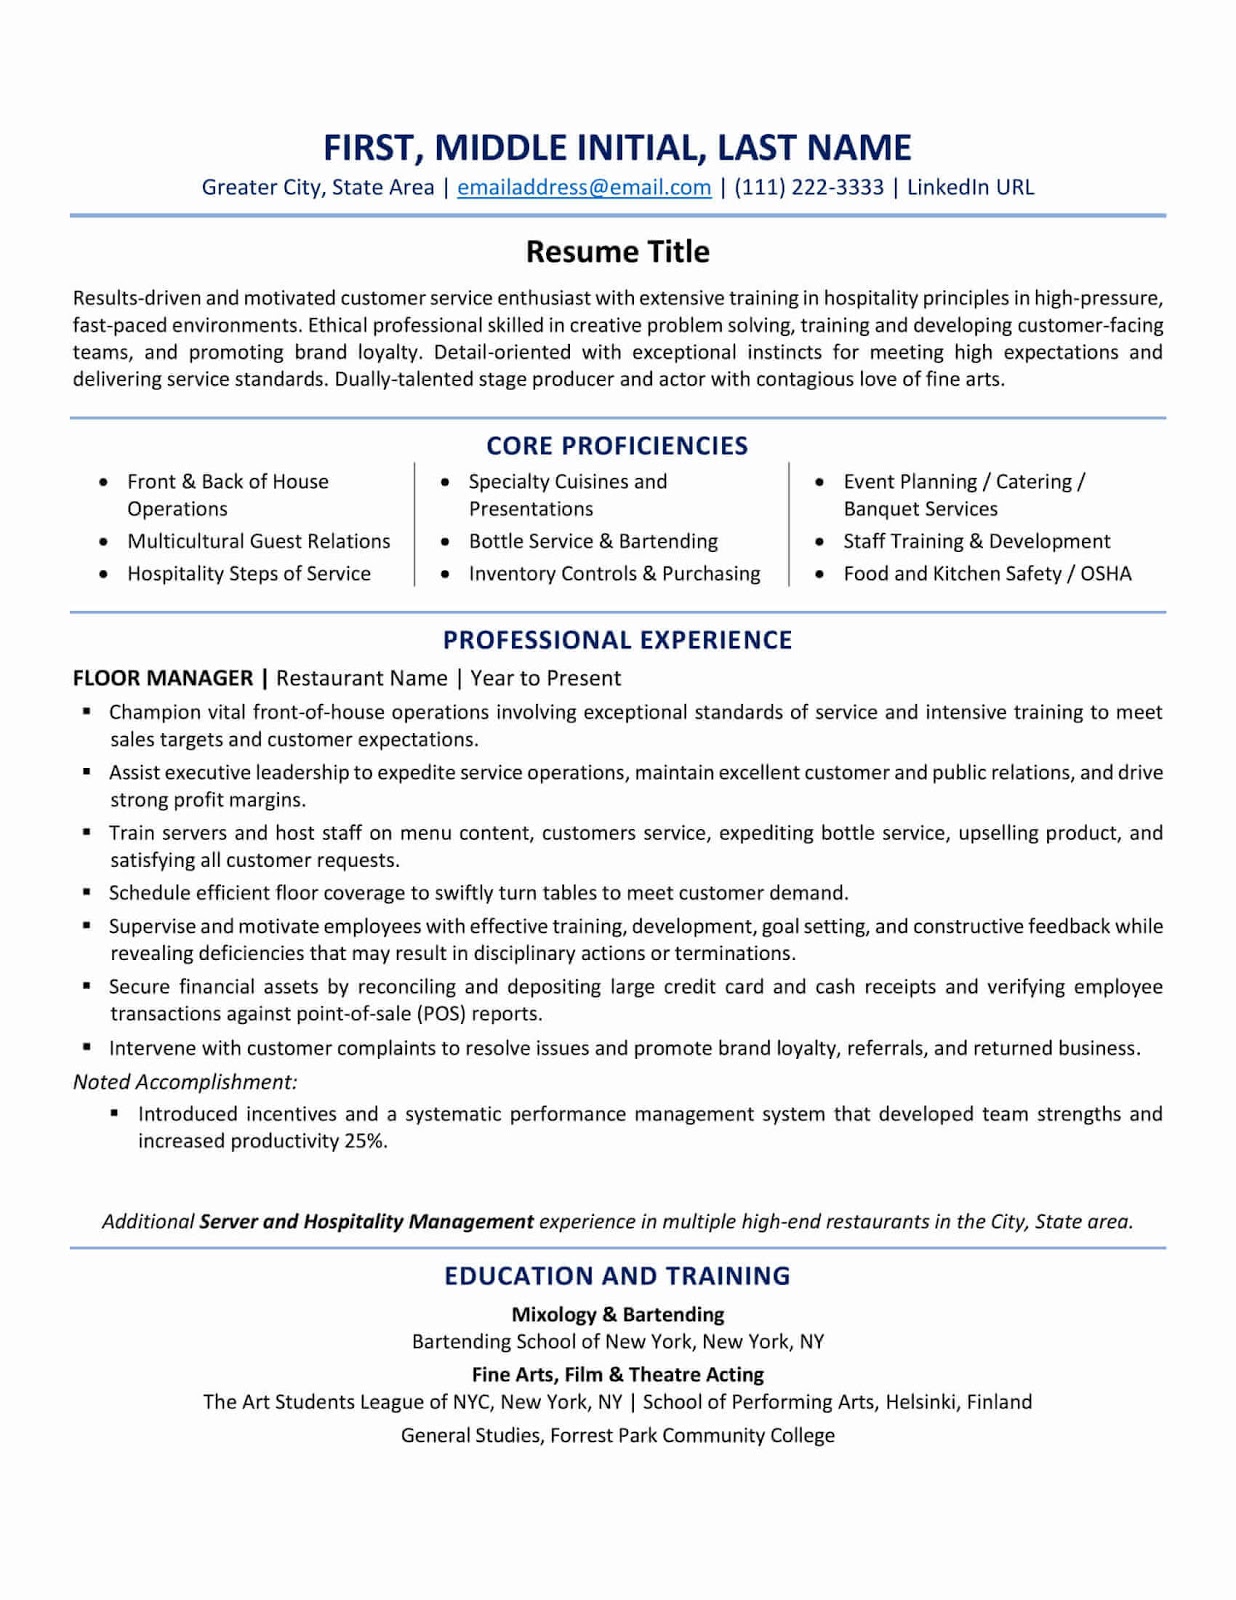 free downloaded ats resume template